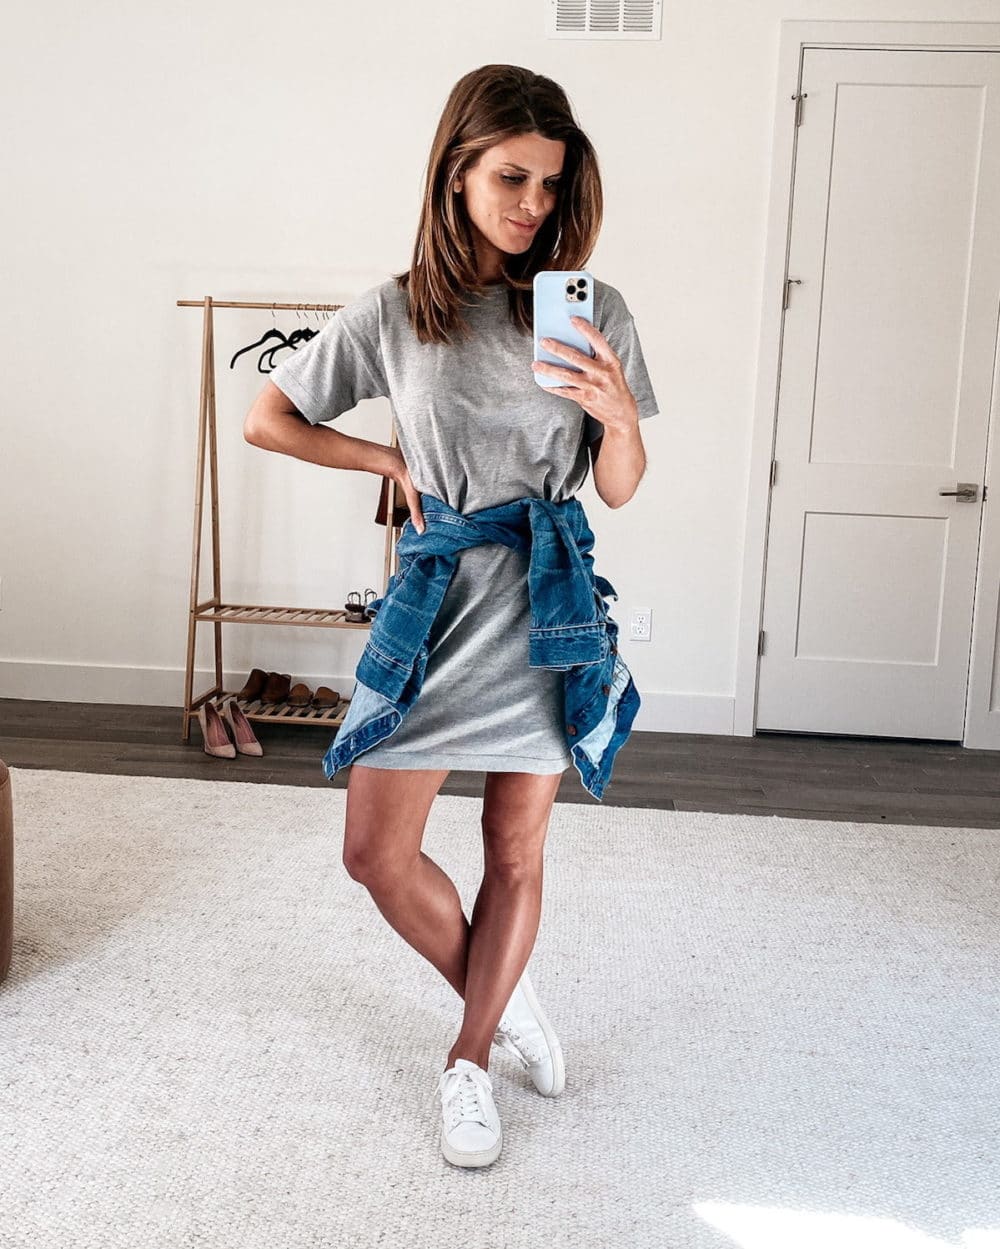 denim and gray dress with Air Force 1s outfit